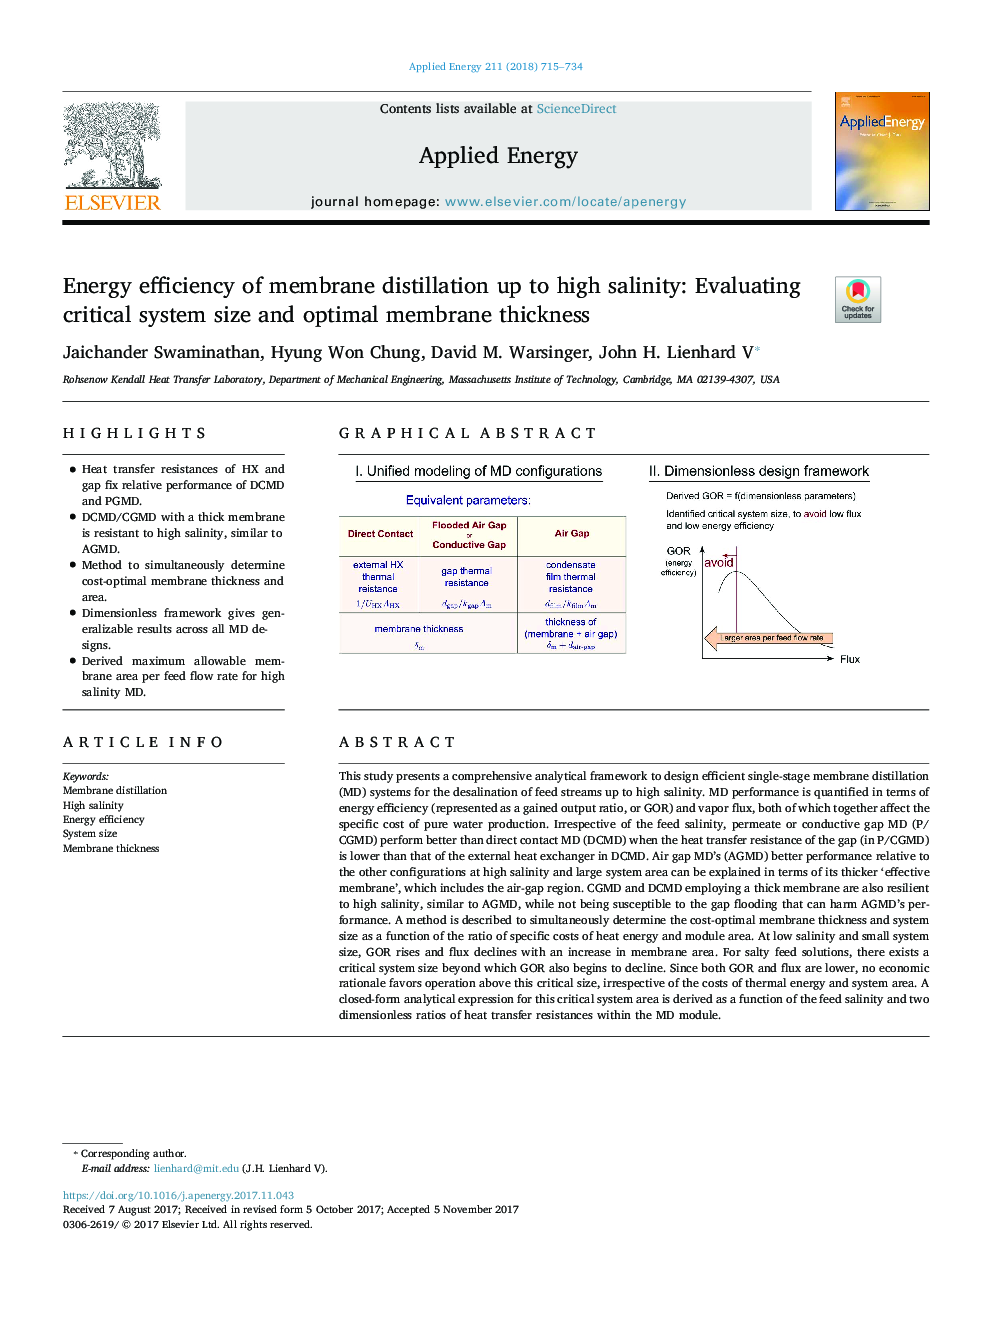 Energy efficiency of membrane distillation up to high salinity: Evaluating critical system size and optimal membrane thickness